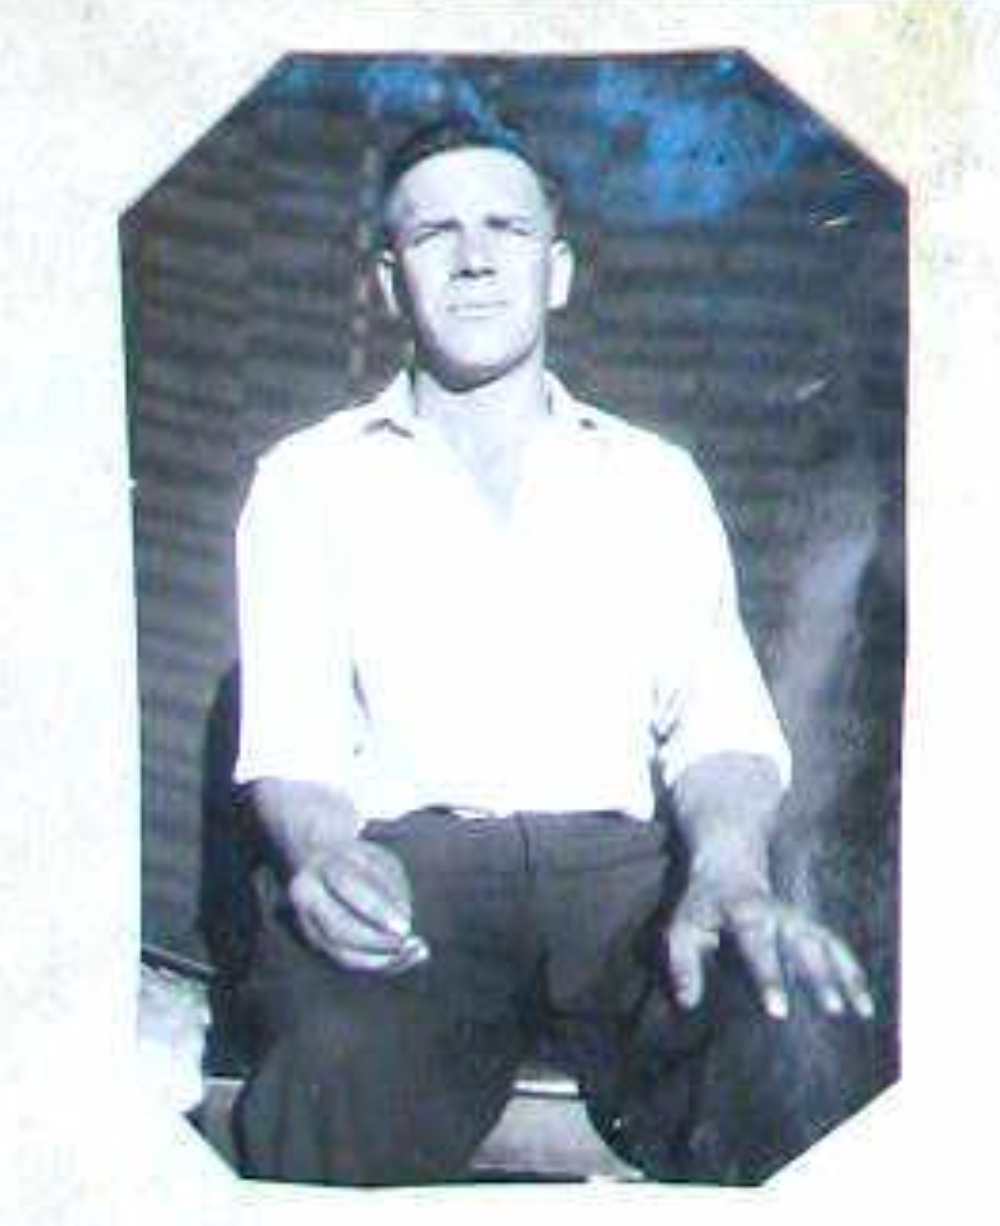 Old black and white photo of Carl Berg sitting on a chair